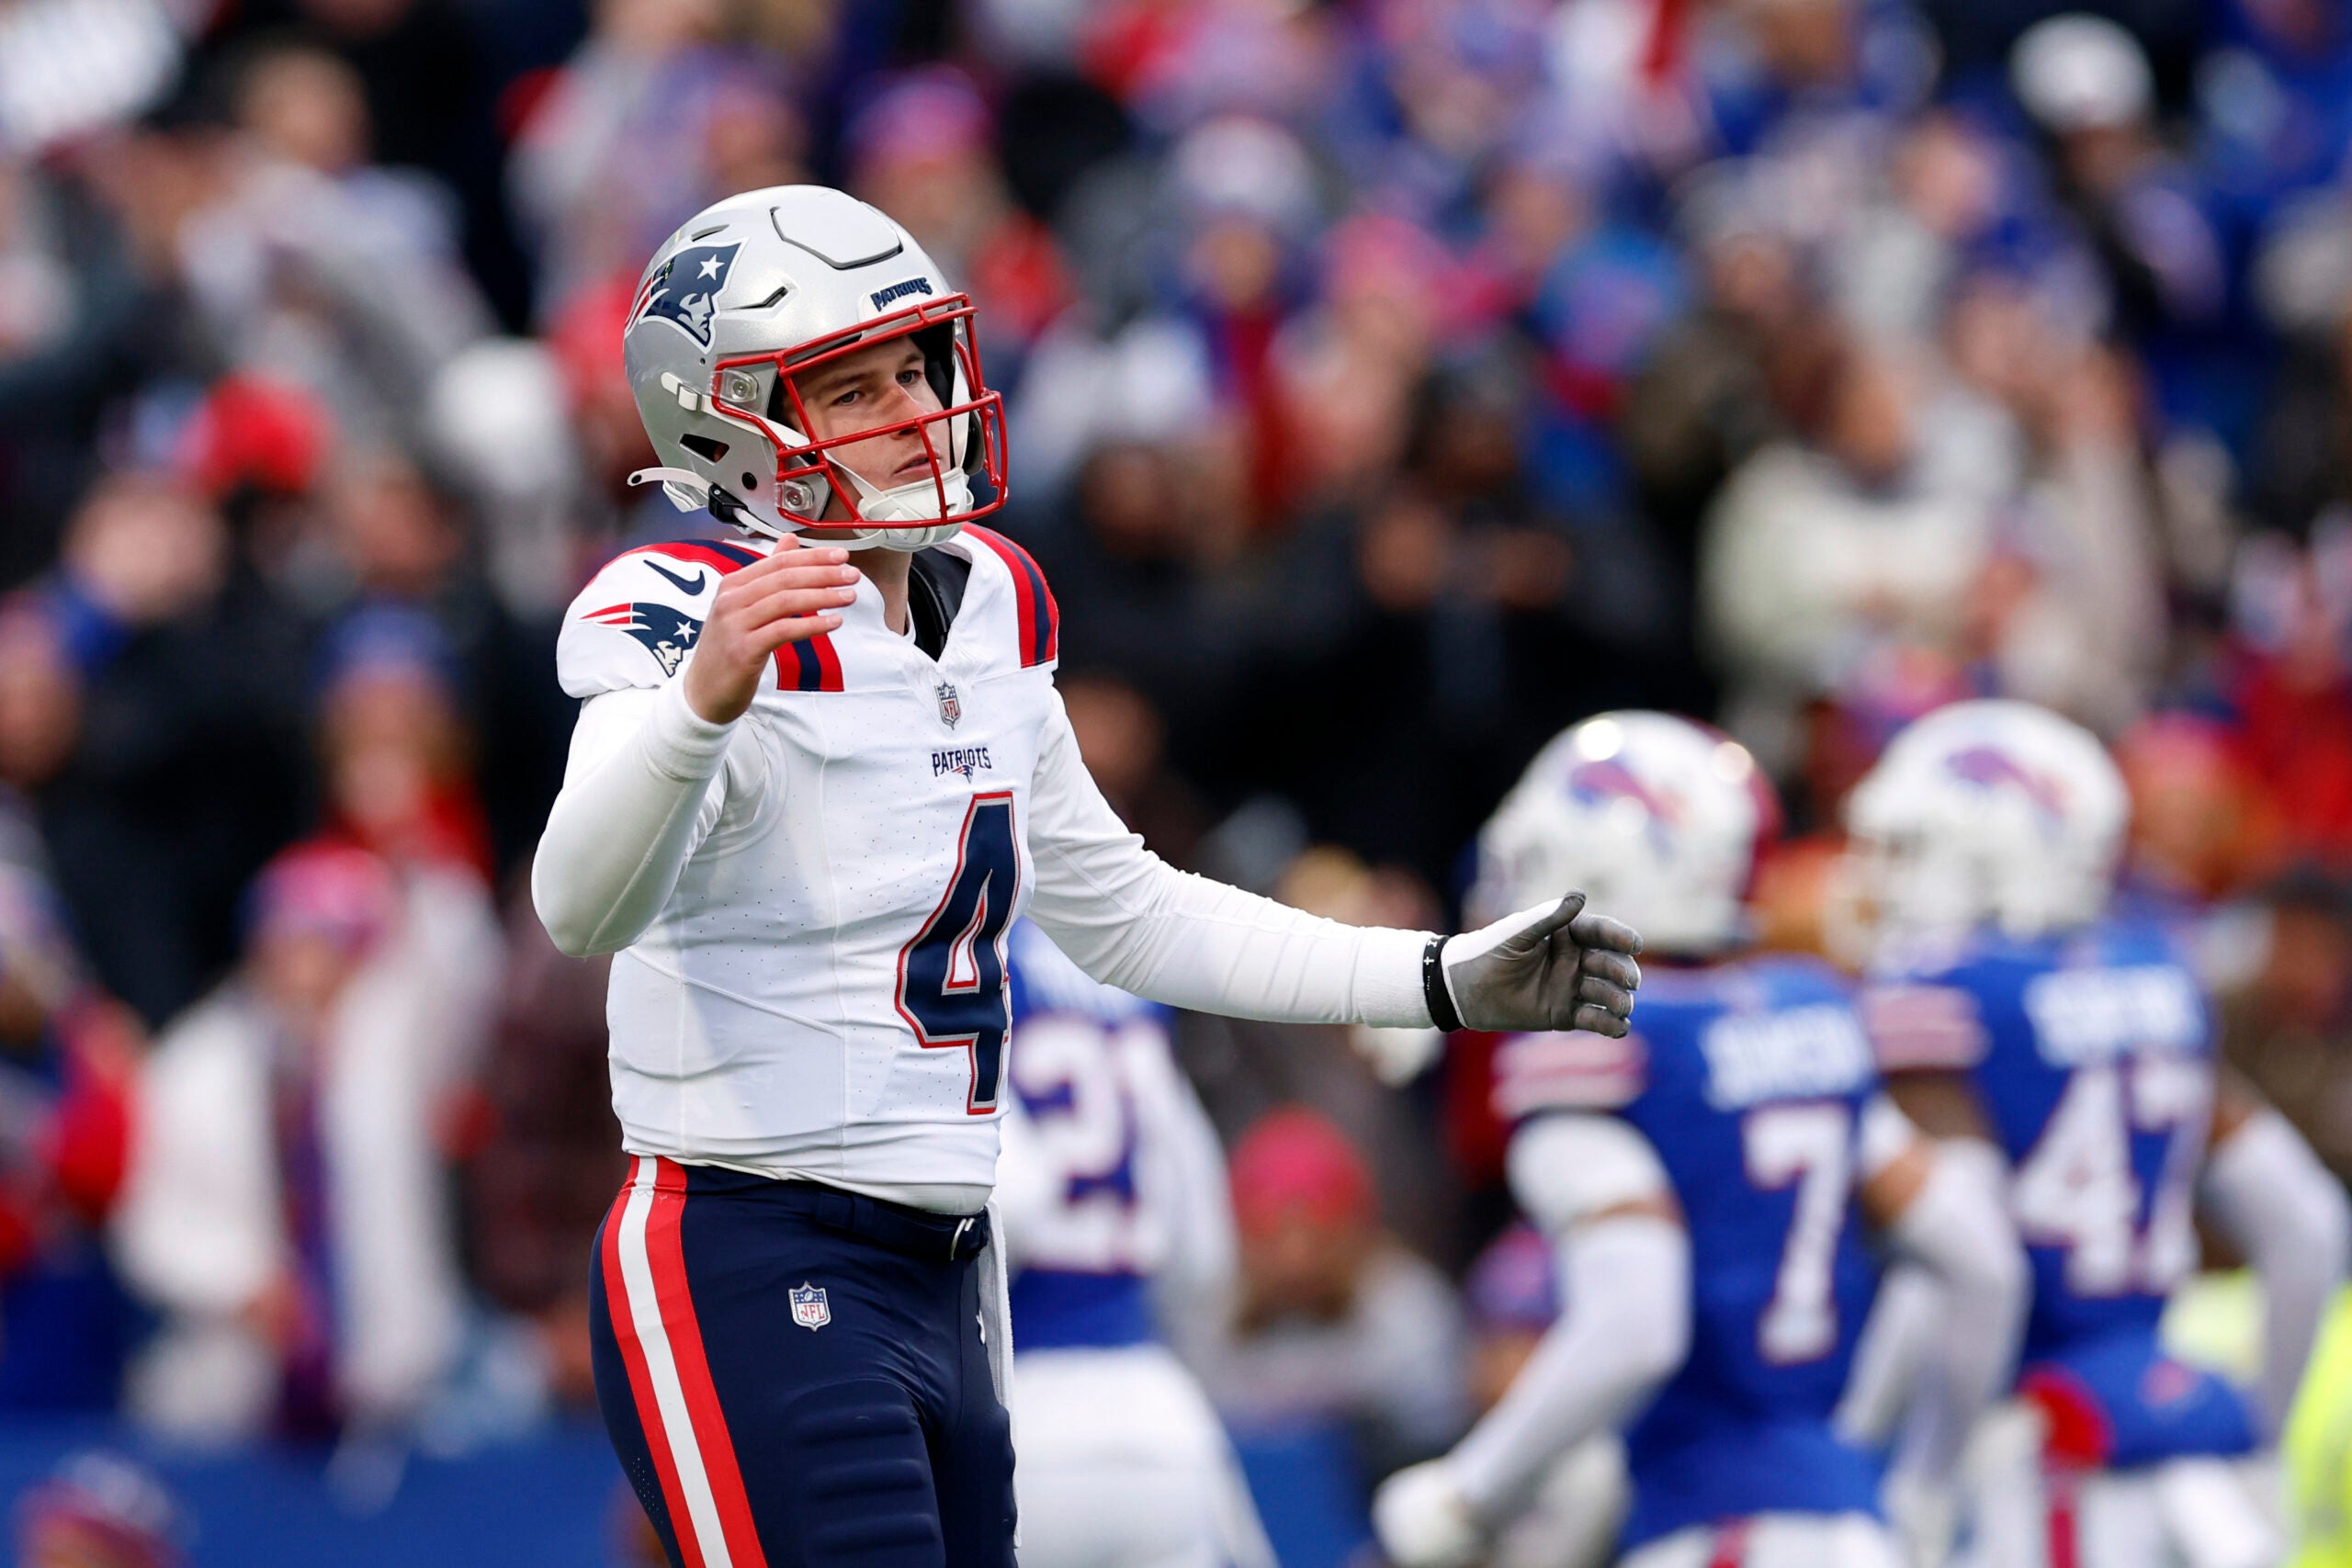 Quick observations from Patriots' 27-21 loss to the Bills